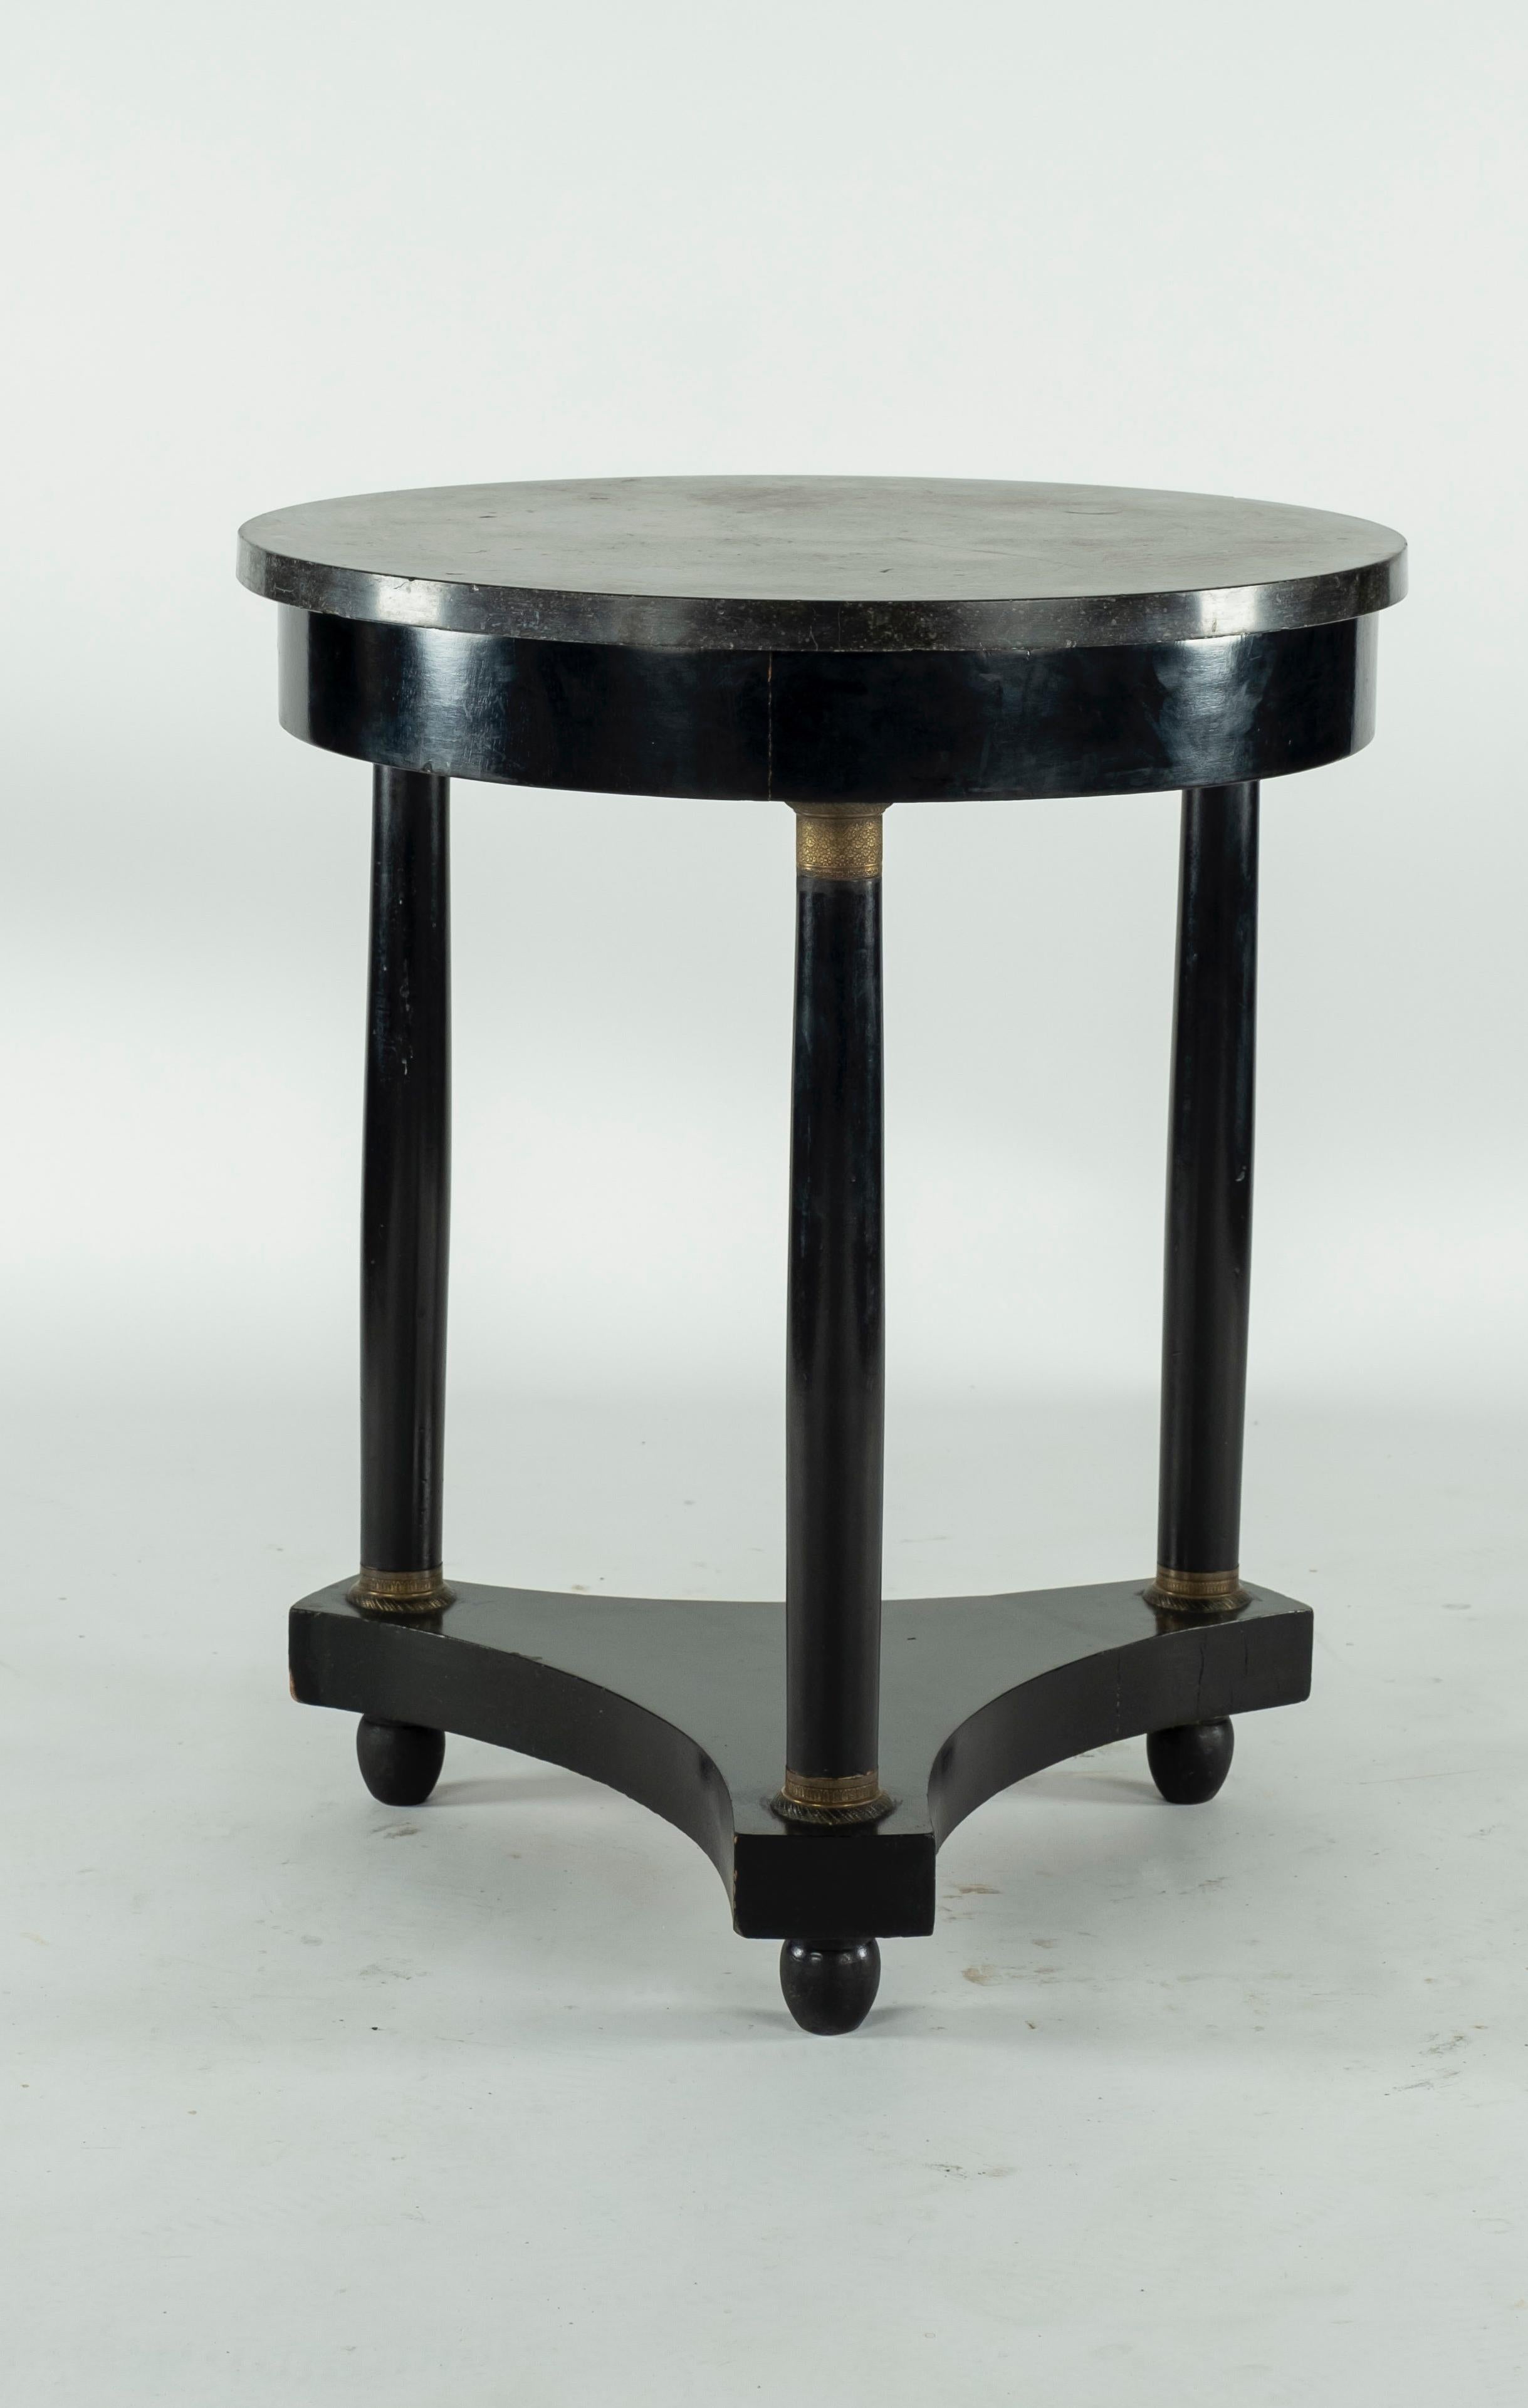 Ebonised French Gueridon with Fossil marble top on 3 oblong bun feet. Metal detail on each of the three columns along the top and the bottom.